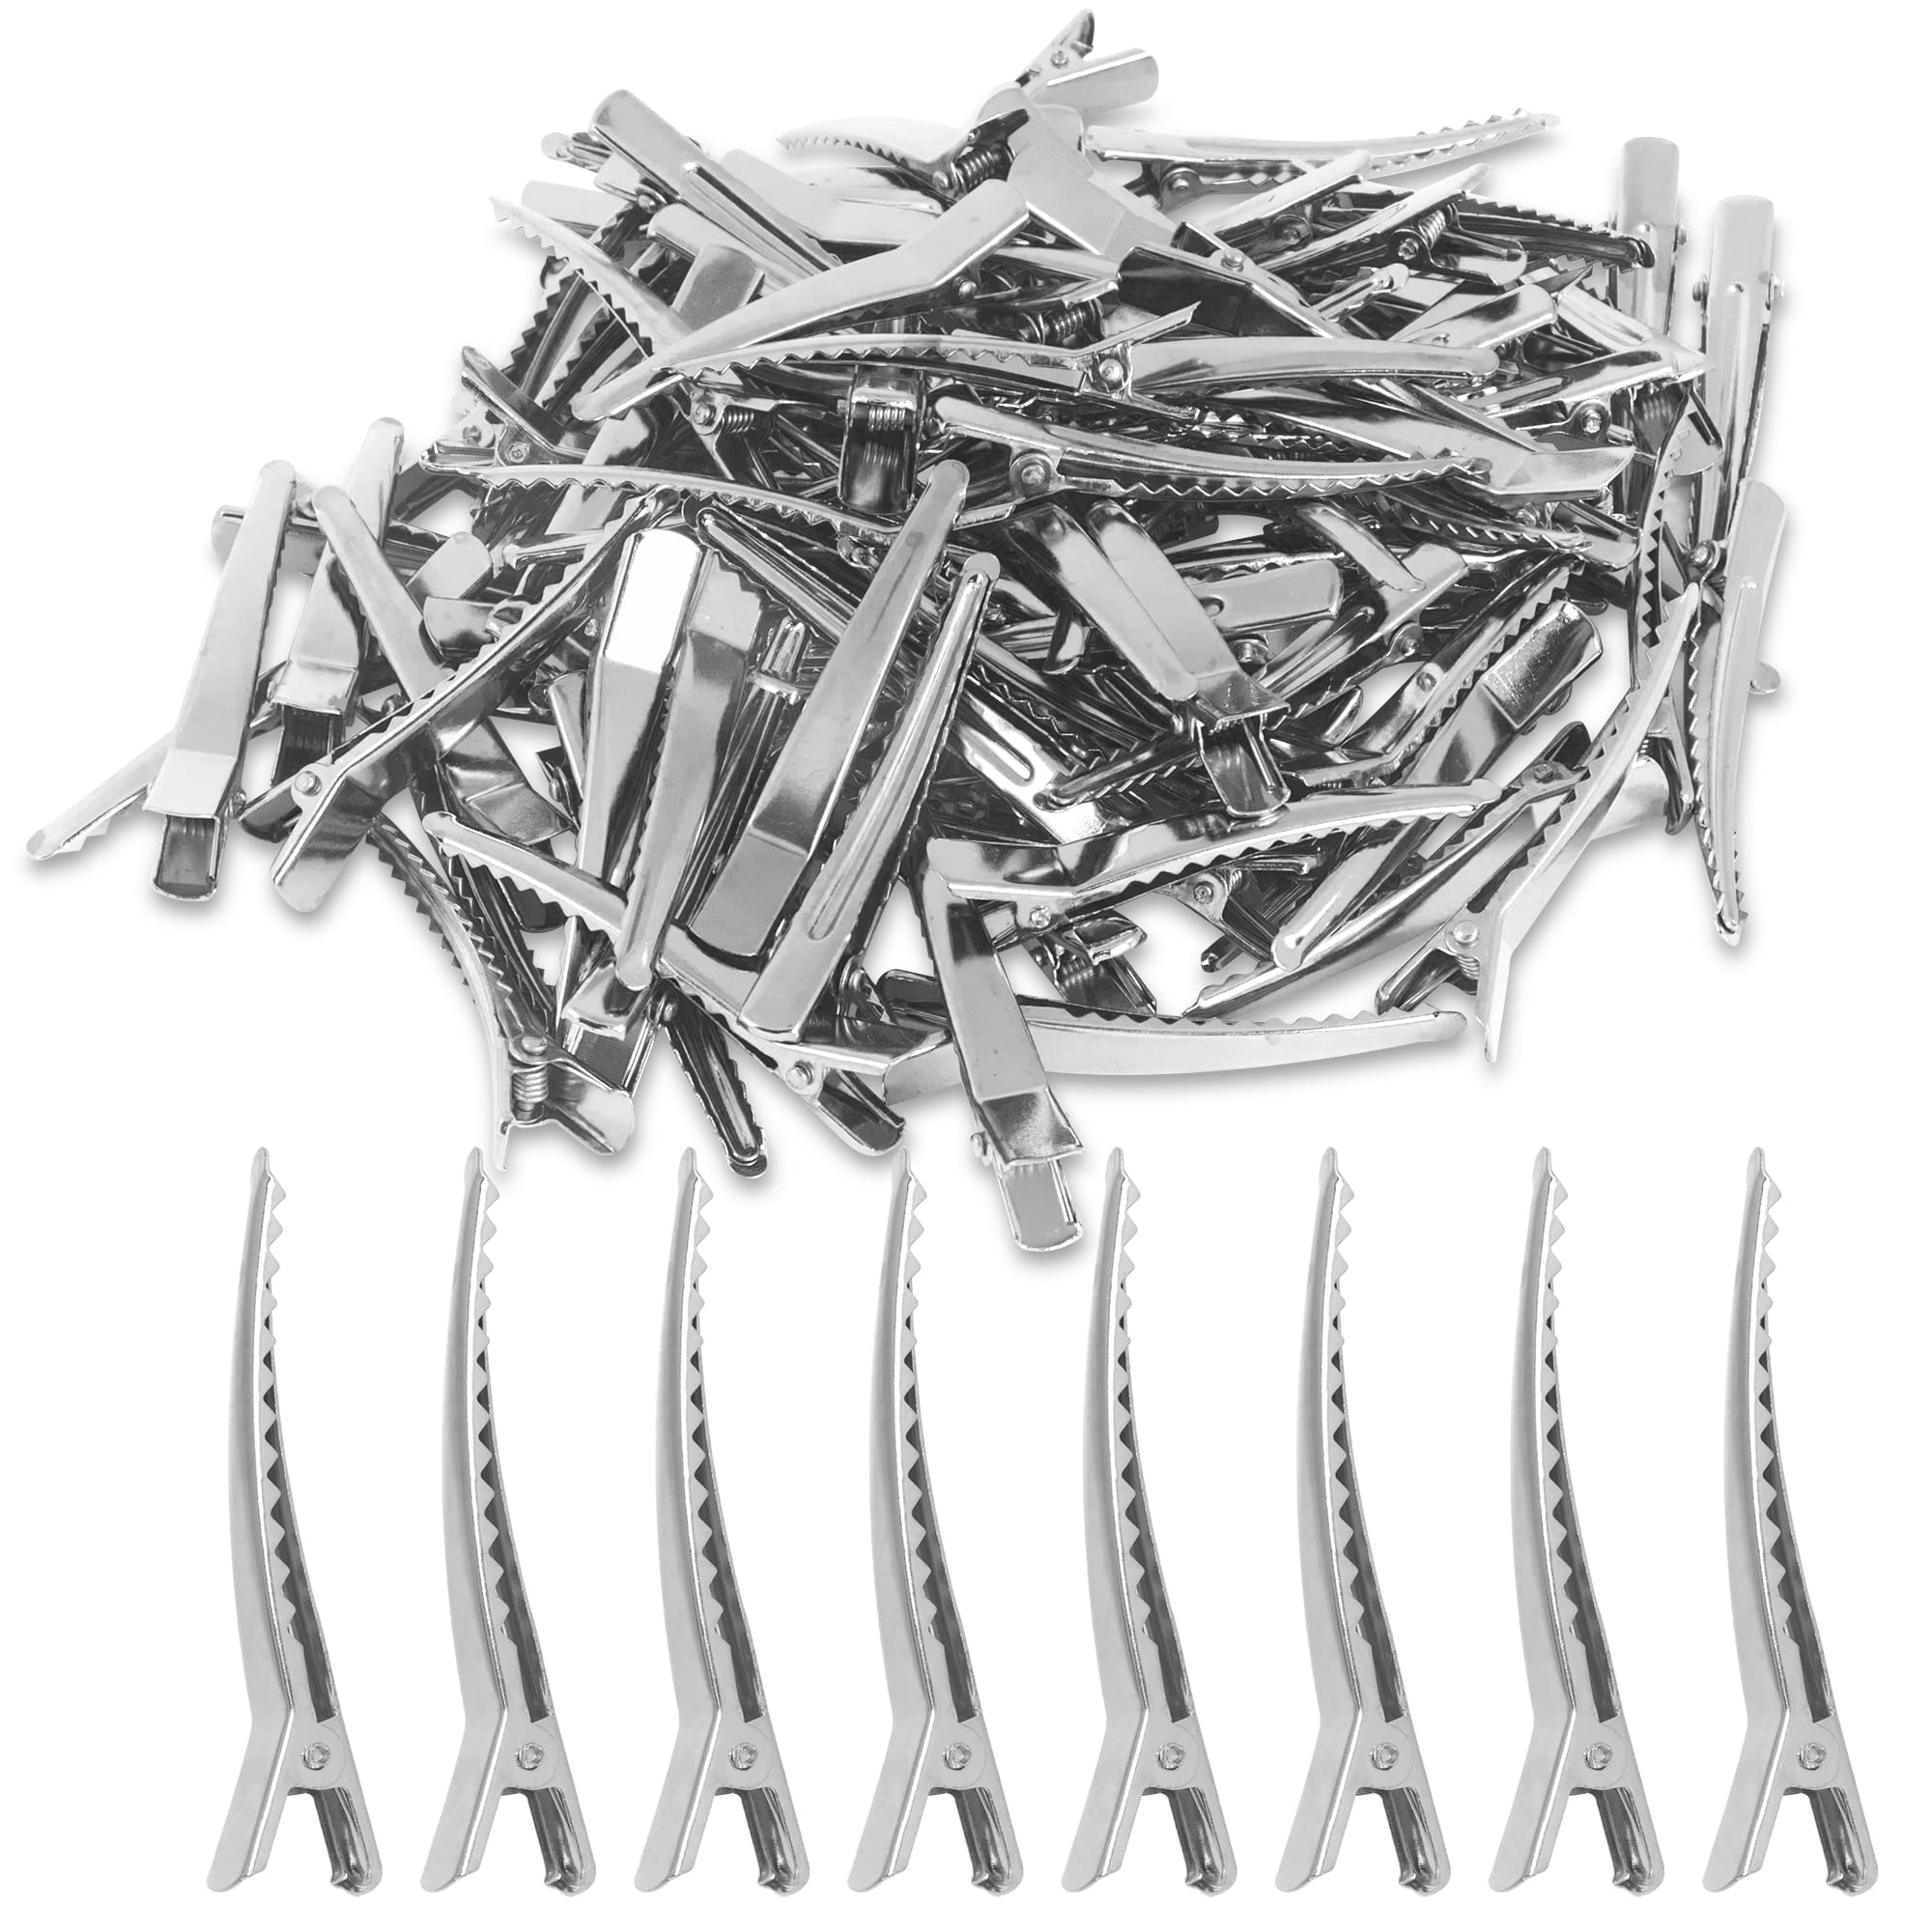 6cm Silver Alligator Teeth Prongs Clips Holders for Hair Care Arts